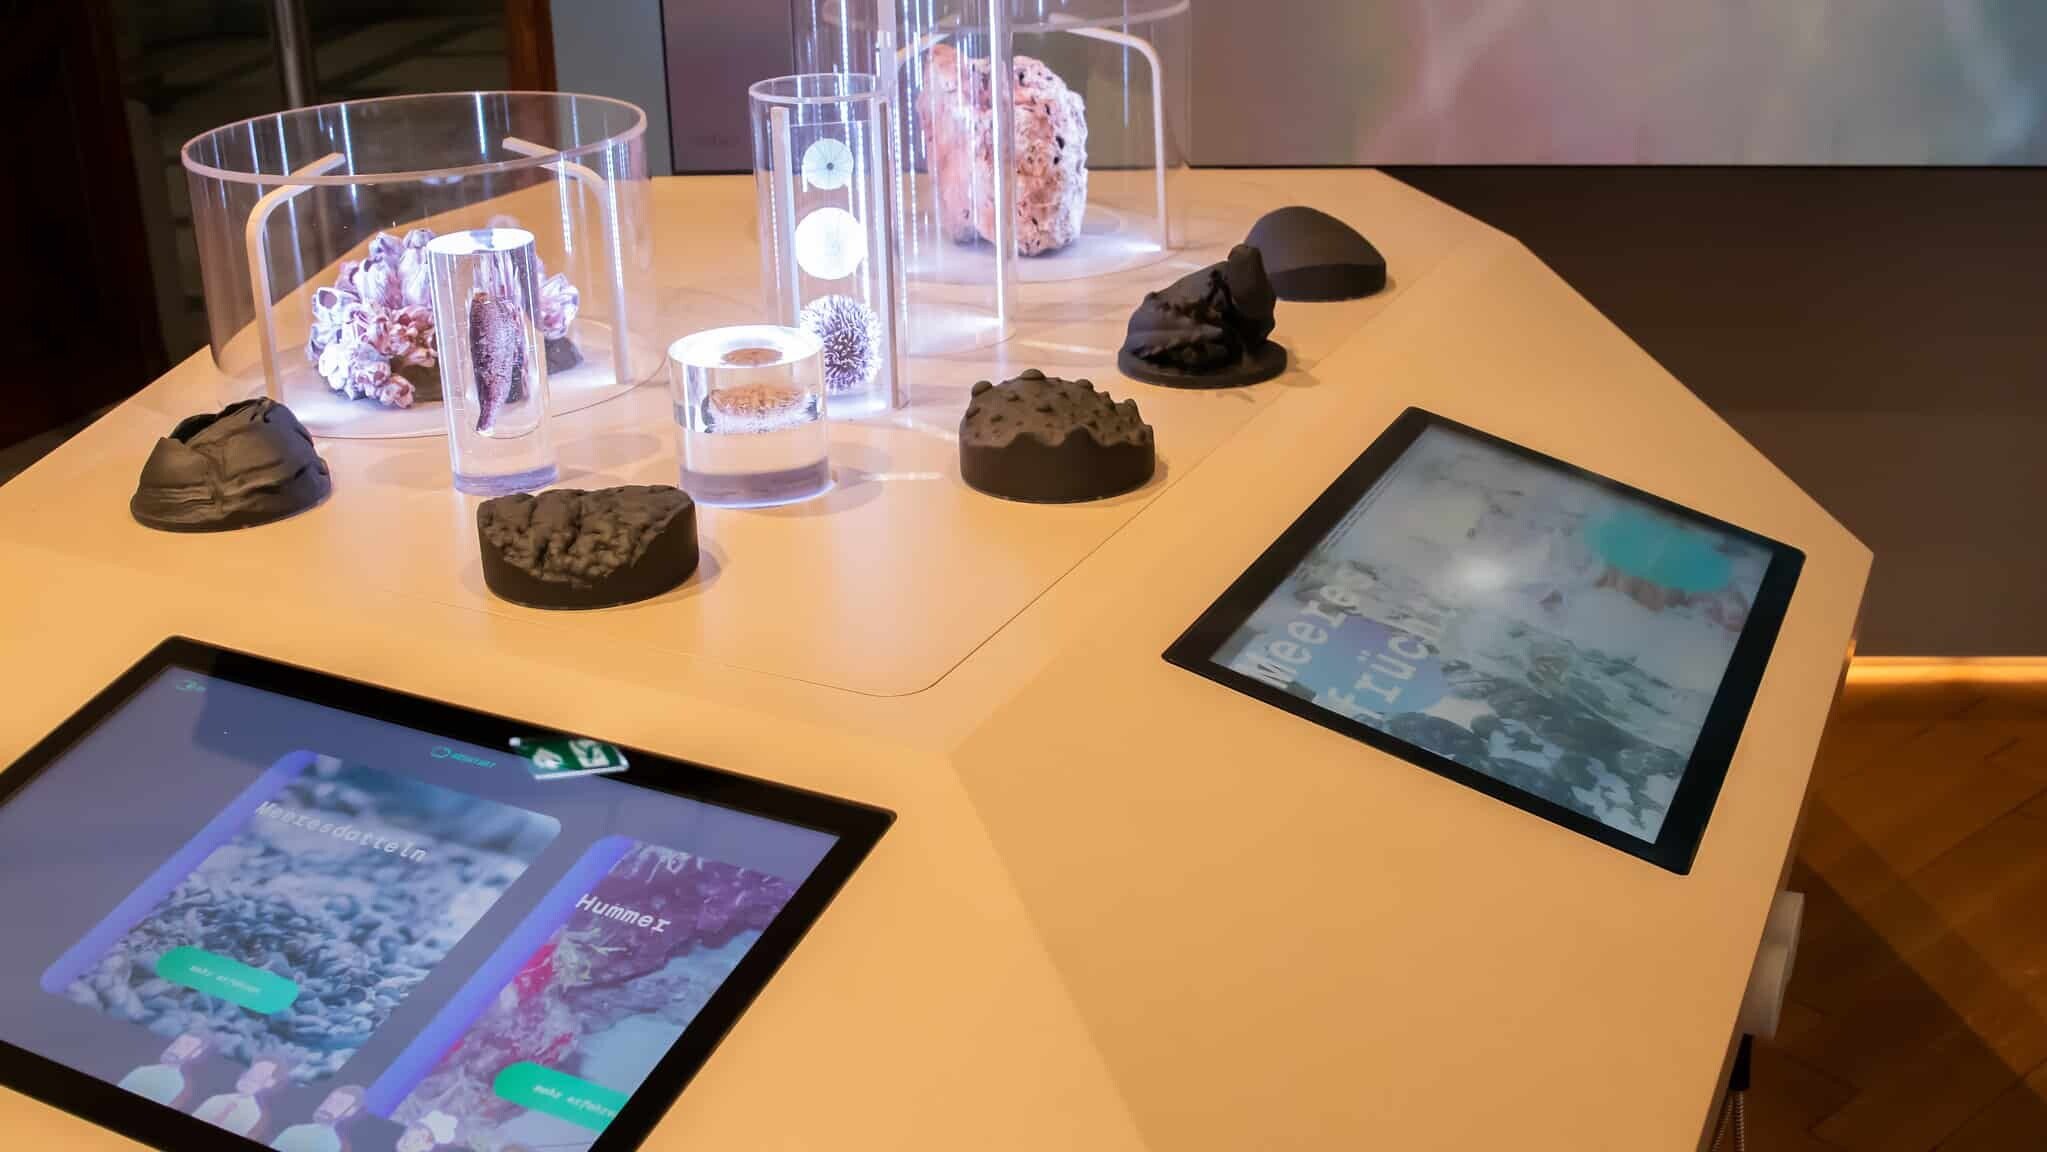 interactive installation in the museum with exhibits and touch screens